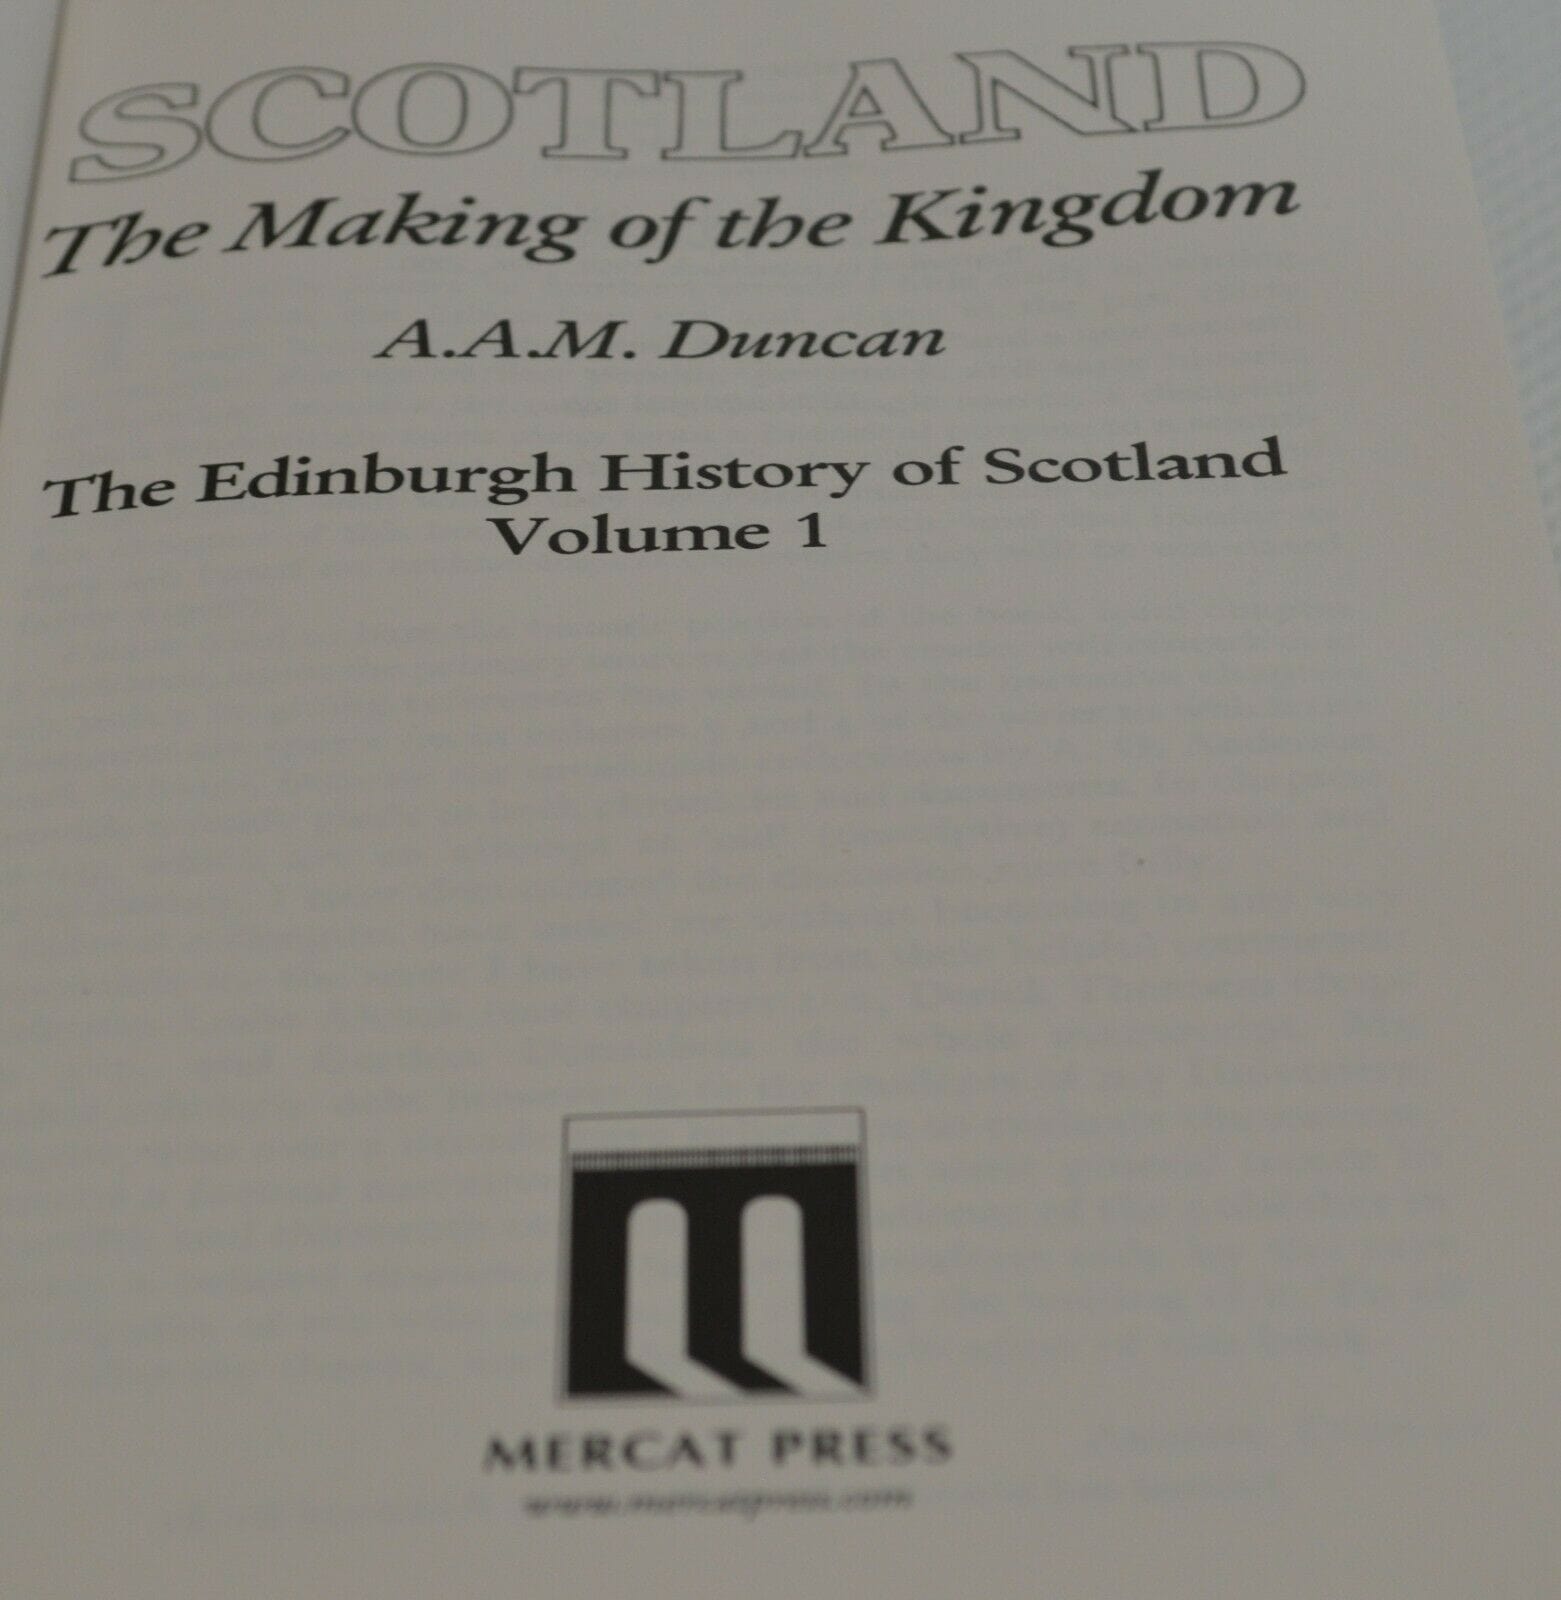 SECONDHAND BOOK SCOTLAND THE MAKING OF THE KINGDOM THE EDINBURGH HISTORY OF SCOTLAND VOL 1(PREVIOUSLY OWNED) GOOD CONDITION - TMD167207